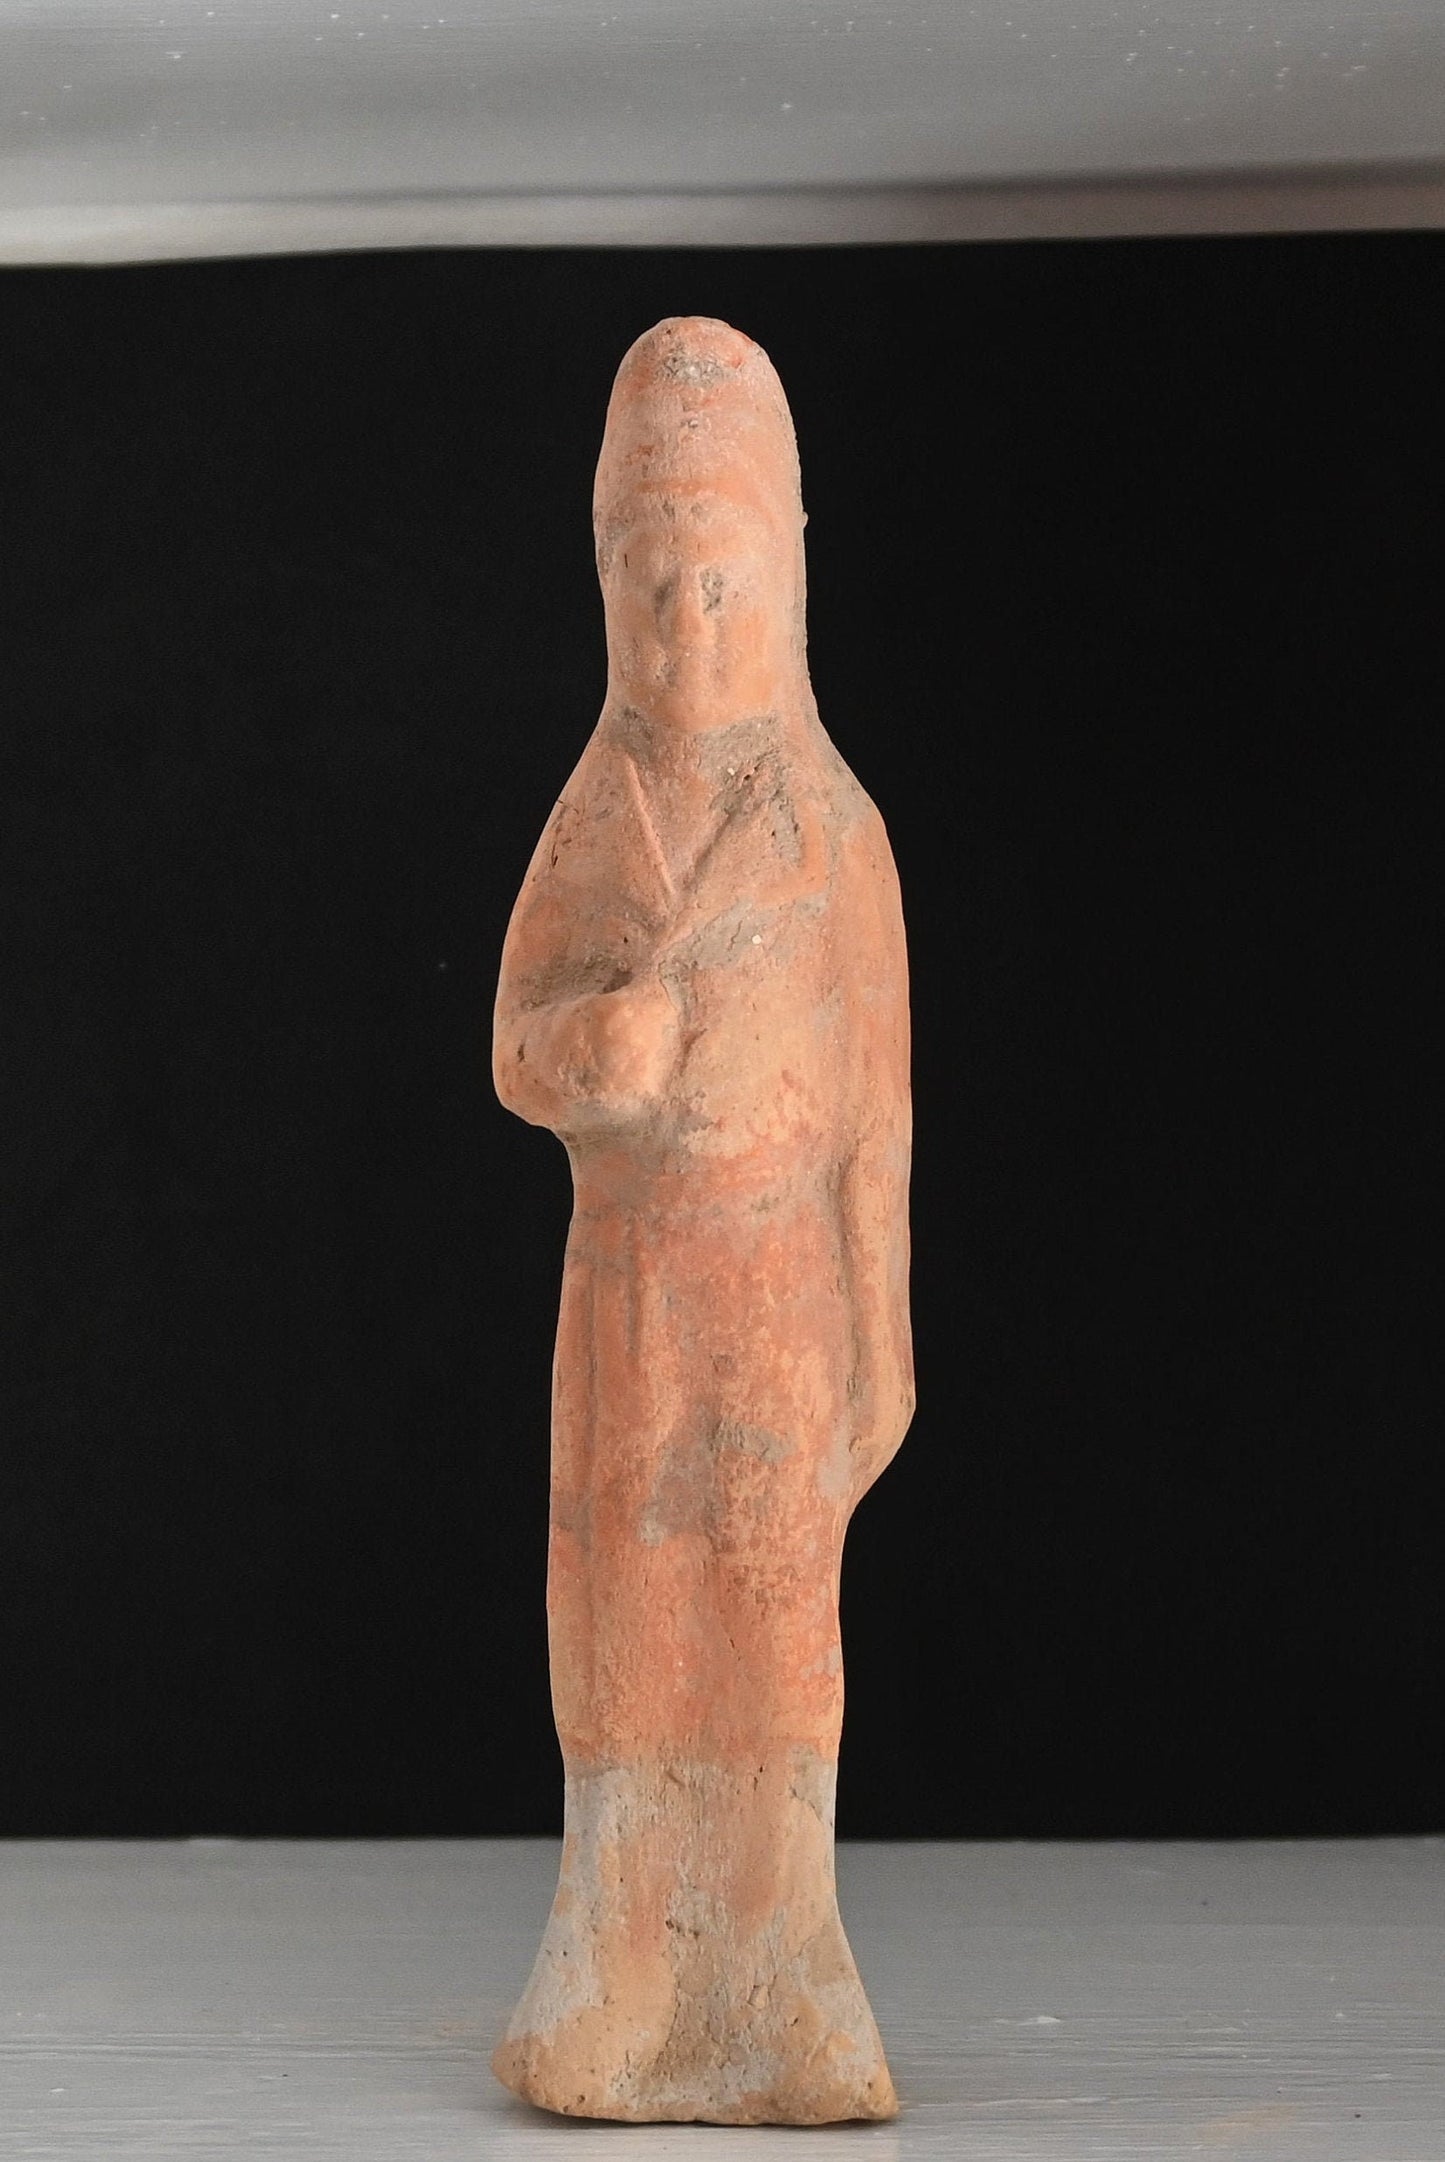 Authentic Han Dynasty, ca. 206 BCE to 220 CE mold-formed terracotta tomb attendant 7 7/8 inches with COA and provenance*+